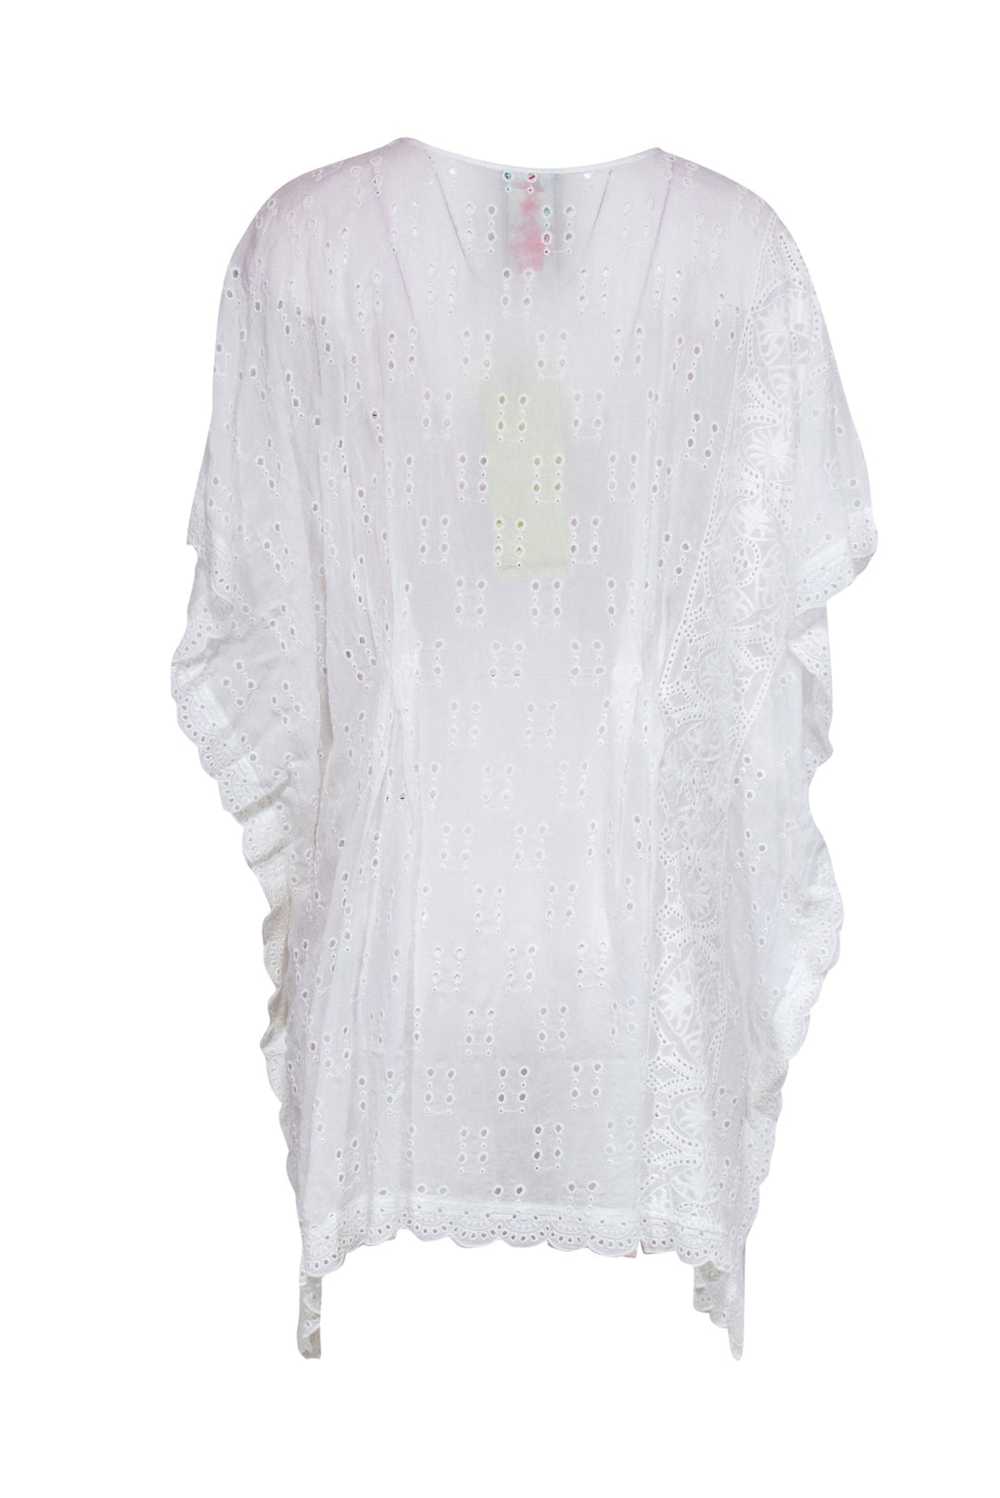 Johnny Was - White Eyelet Caftan-Style Top w/ Sca… - image 3